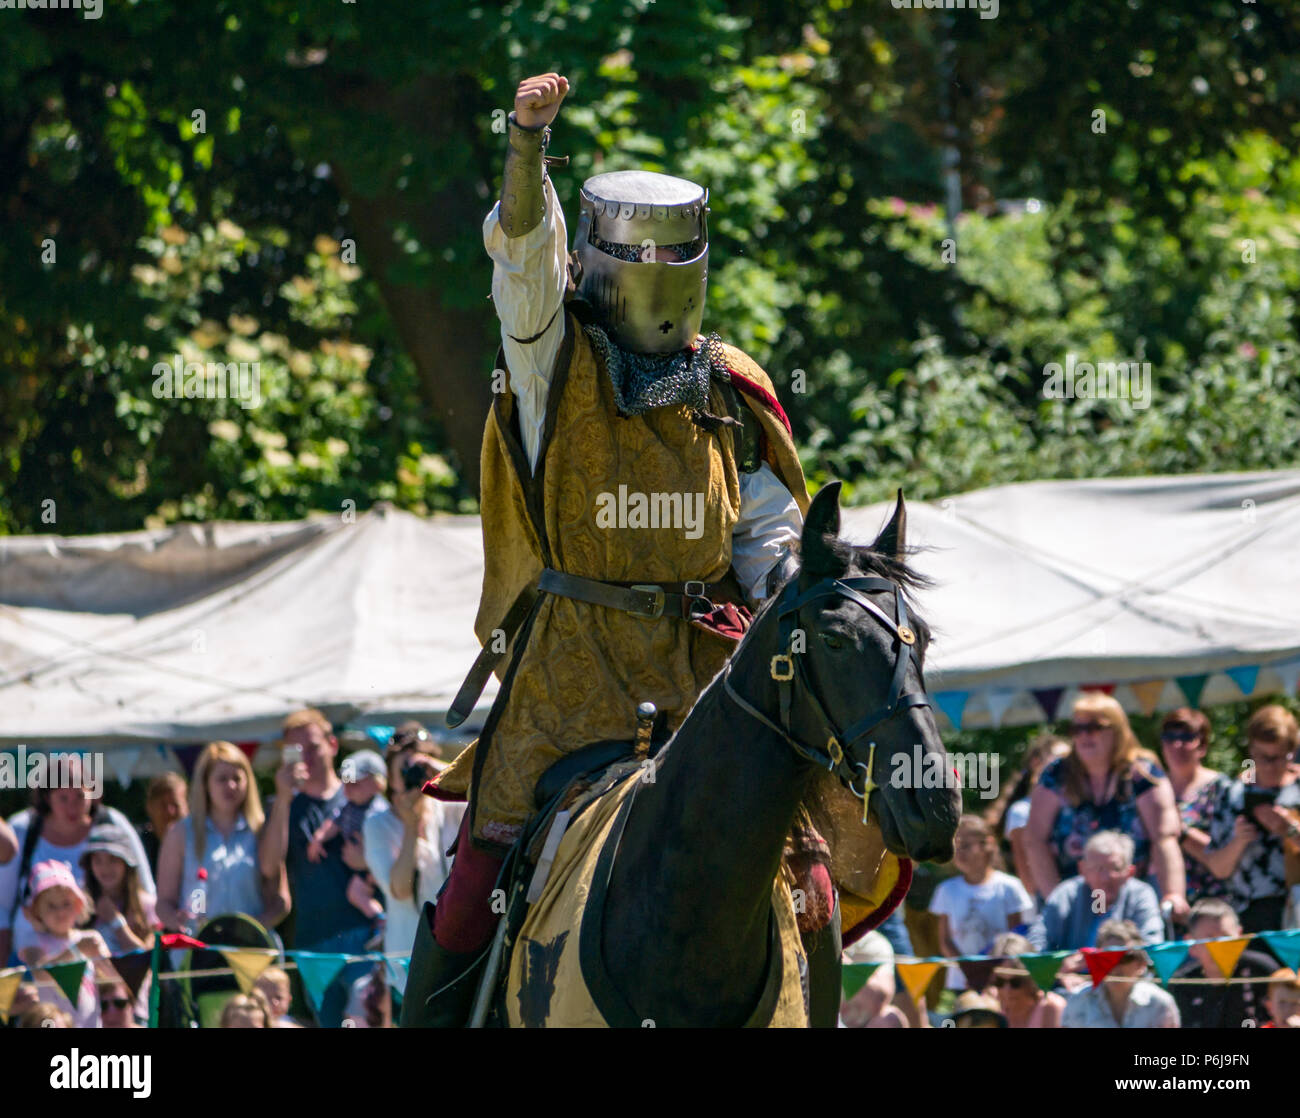 Jousting and Medieval Fair at Linlithgow Palace, Linlithgow, Scotland, United Kingdom, 30th June 2018. Historic Environment Scotland kick off their summer entertainment programme with a fabulous display of Medieval jousting in the grounds of the historic castle. The jousting is performed by Les Amis D'Onno equine stunt team. A knight raises his arm in salute to the crowd Stock Photo